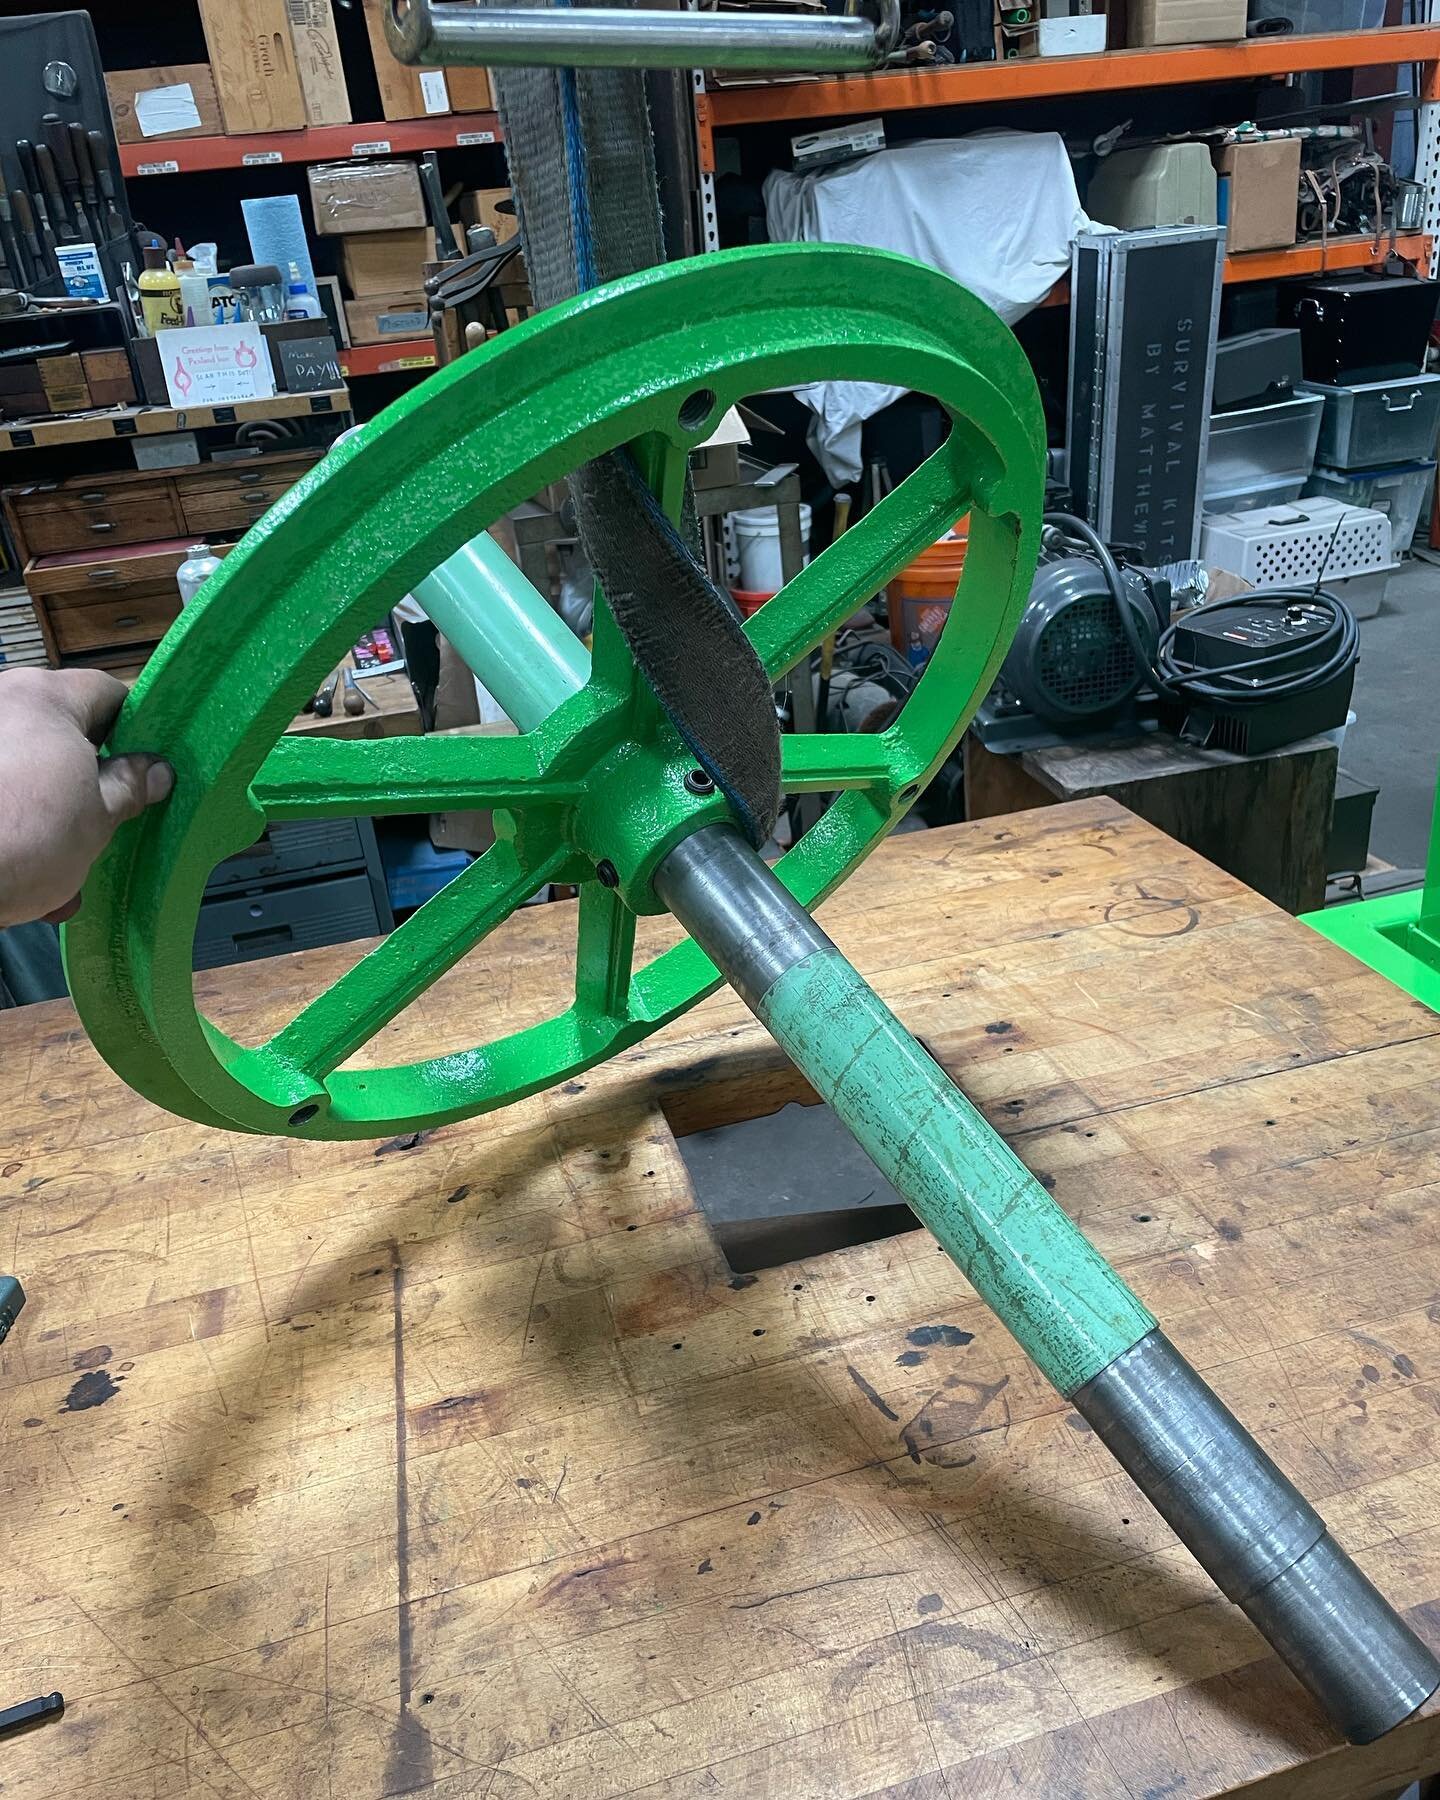 Those cast iron wheels i machined a while ago were for this massive knife grinder I&rsquo;m building for @bernalcutlery 

After machining and powder coating the wheels, here&rsquo;s some process of me using the bridge crane to assemble the iron wheel